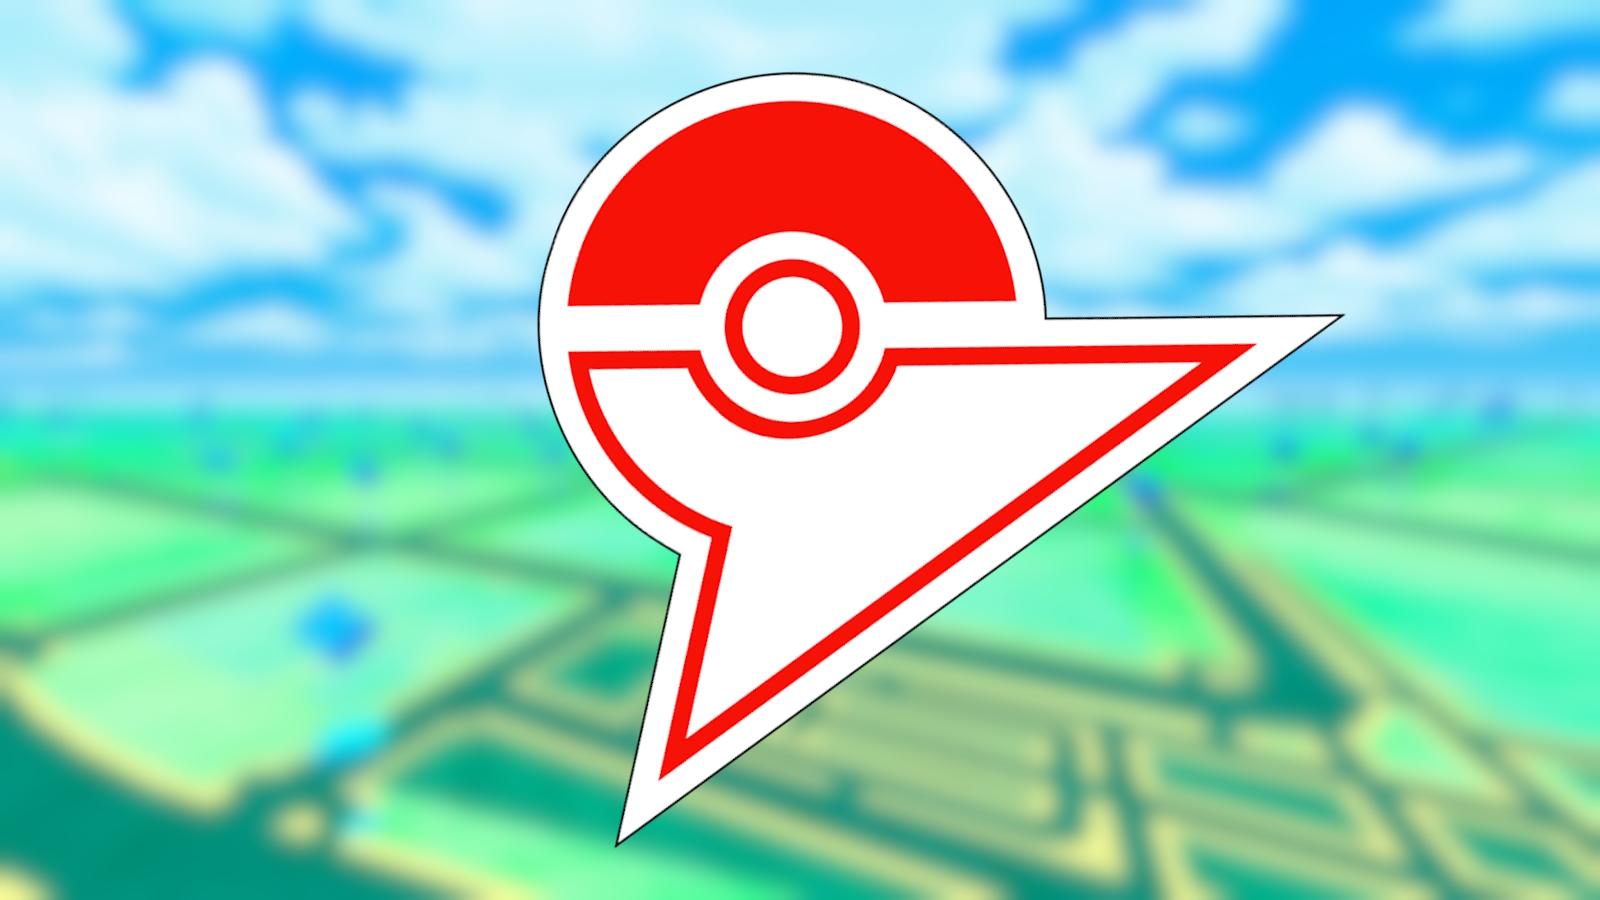 Pokemon GO gym symbol in front of blurred map background.